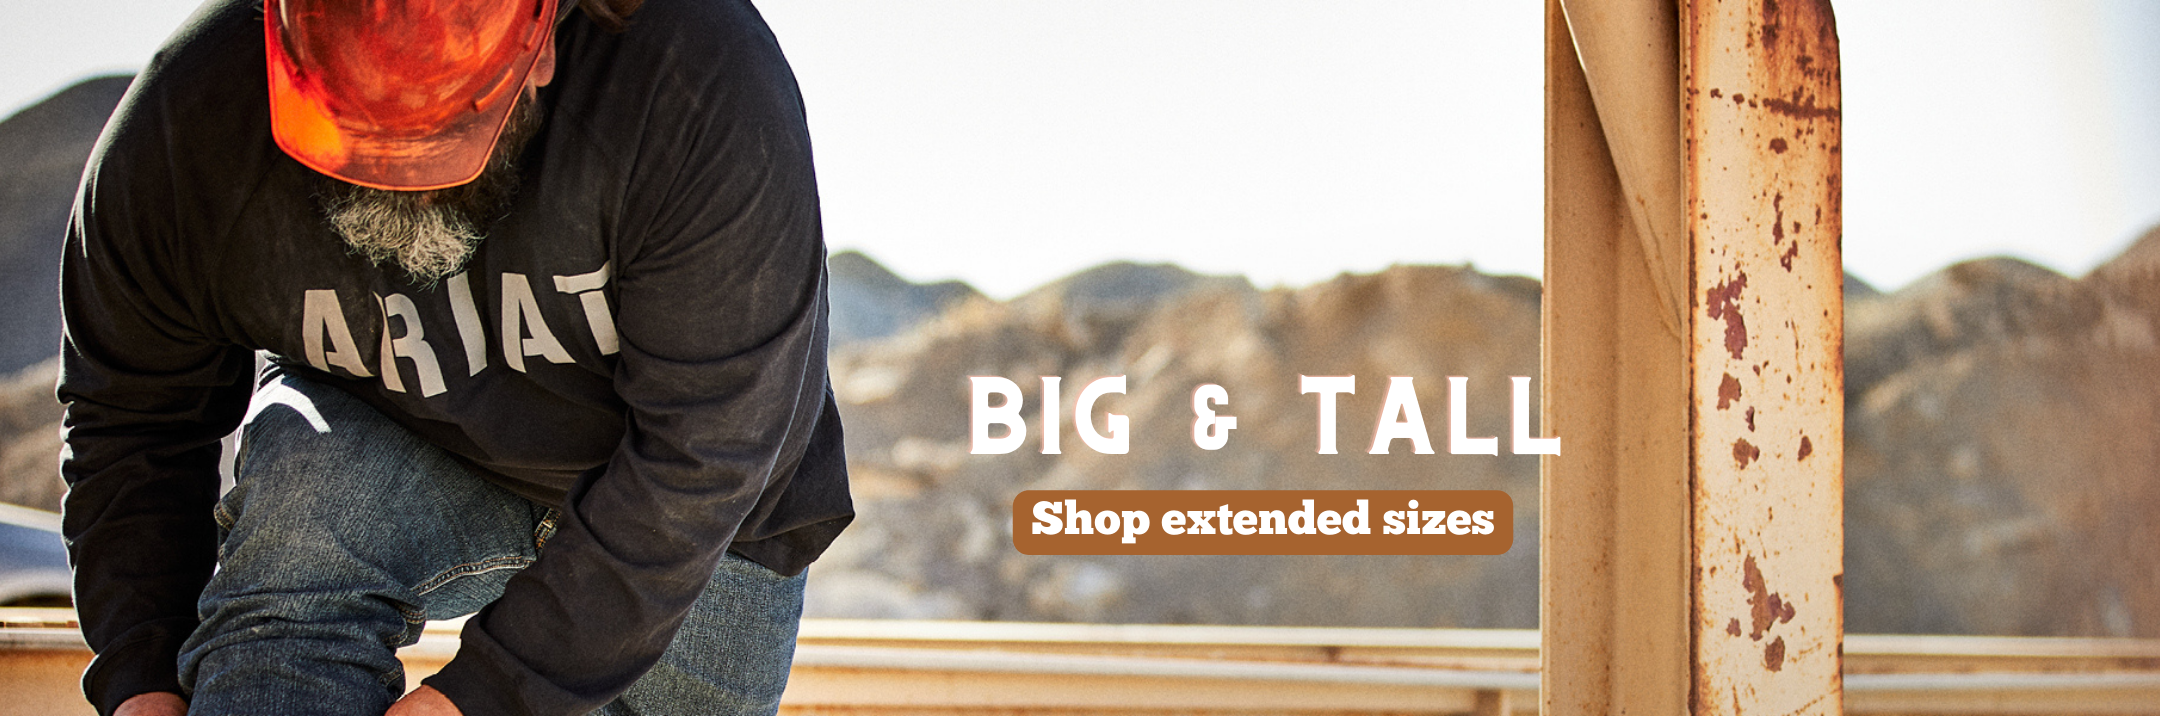 Men's Big And Tall Clothing - Big And Tall Workwear - Harrisons